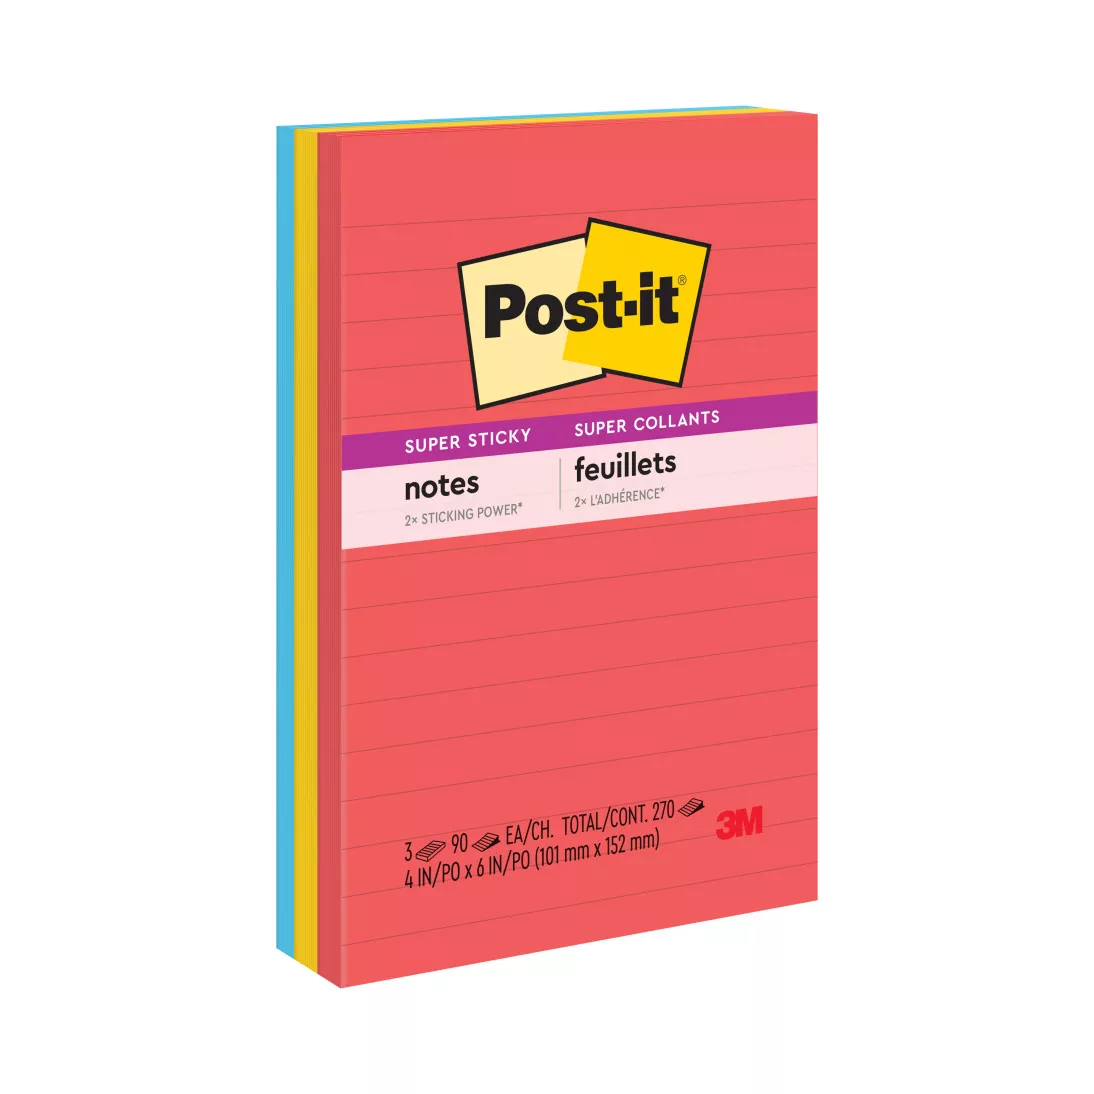 Post-it® Super Sticky Notes 660-3SSAN, 4 in x 6 in (101 mm x 152 mm)
Marrakesh Collection, Lined, 3 Pads/Pack